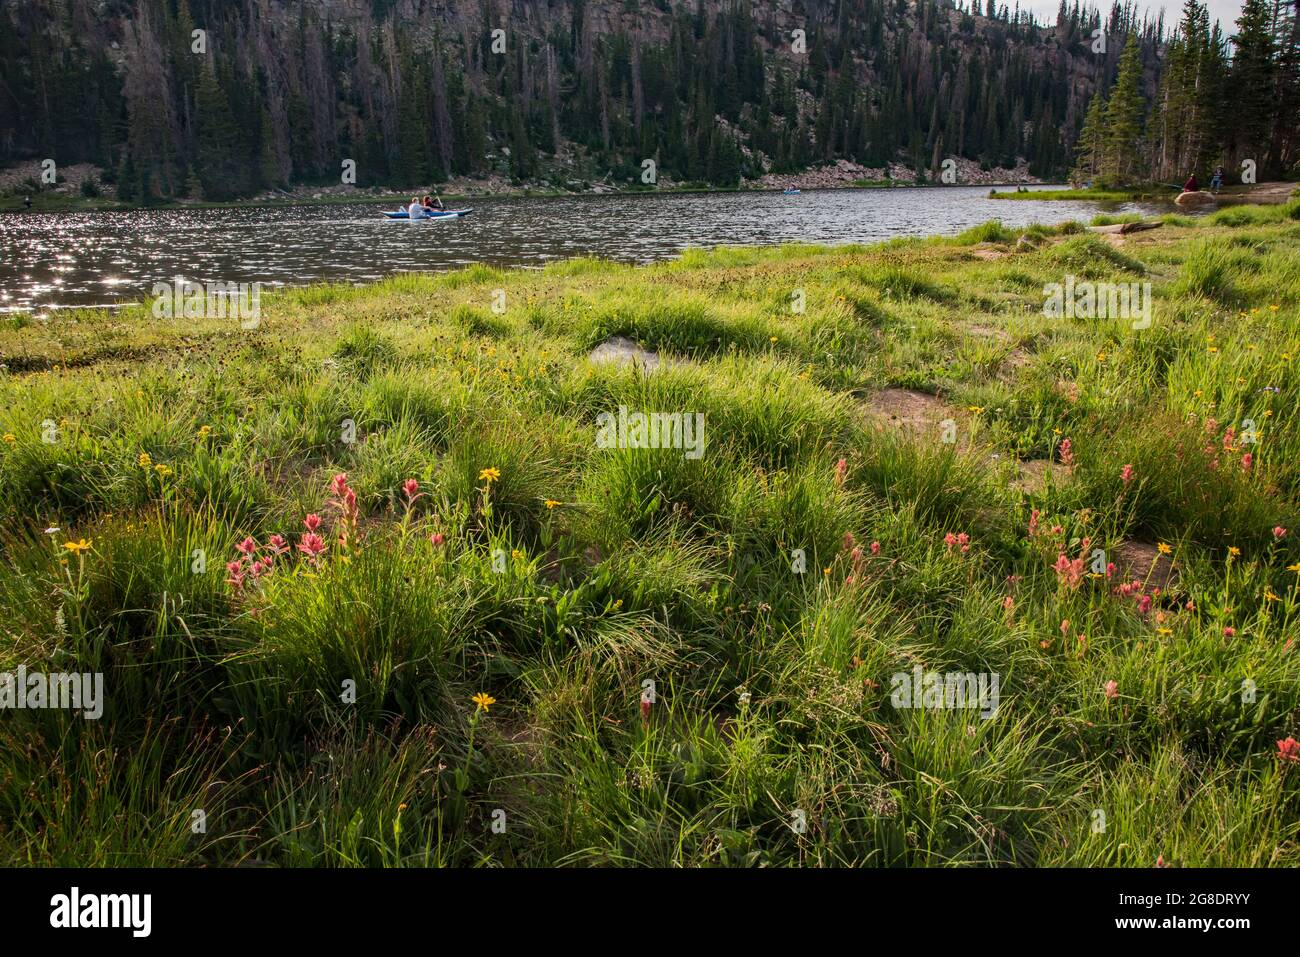 Kayakers and fishermen on a high mountain lake with a meadow of wildflowers in the foreground. Stock Photo